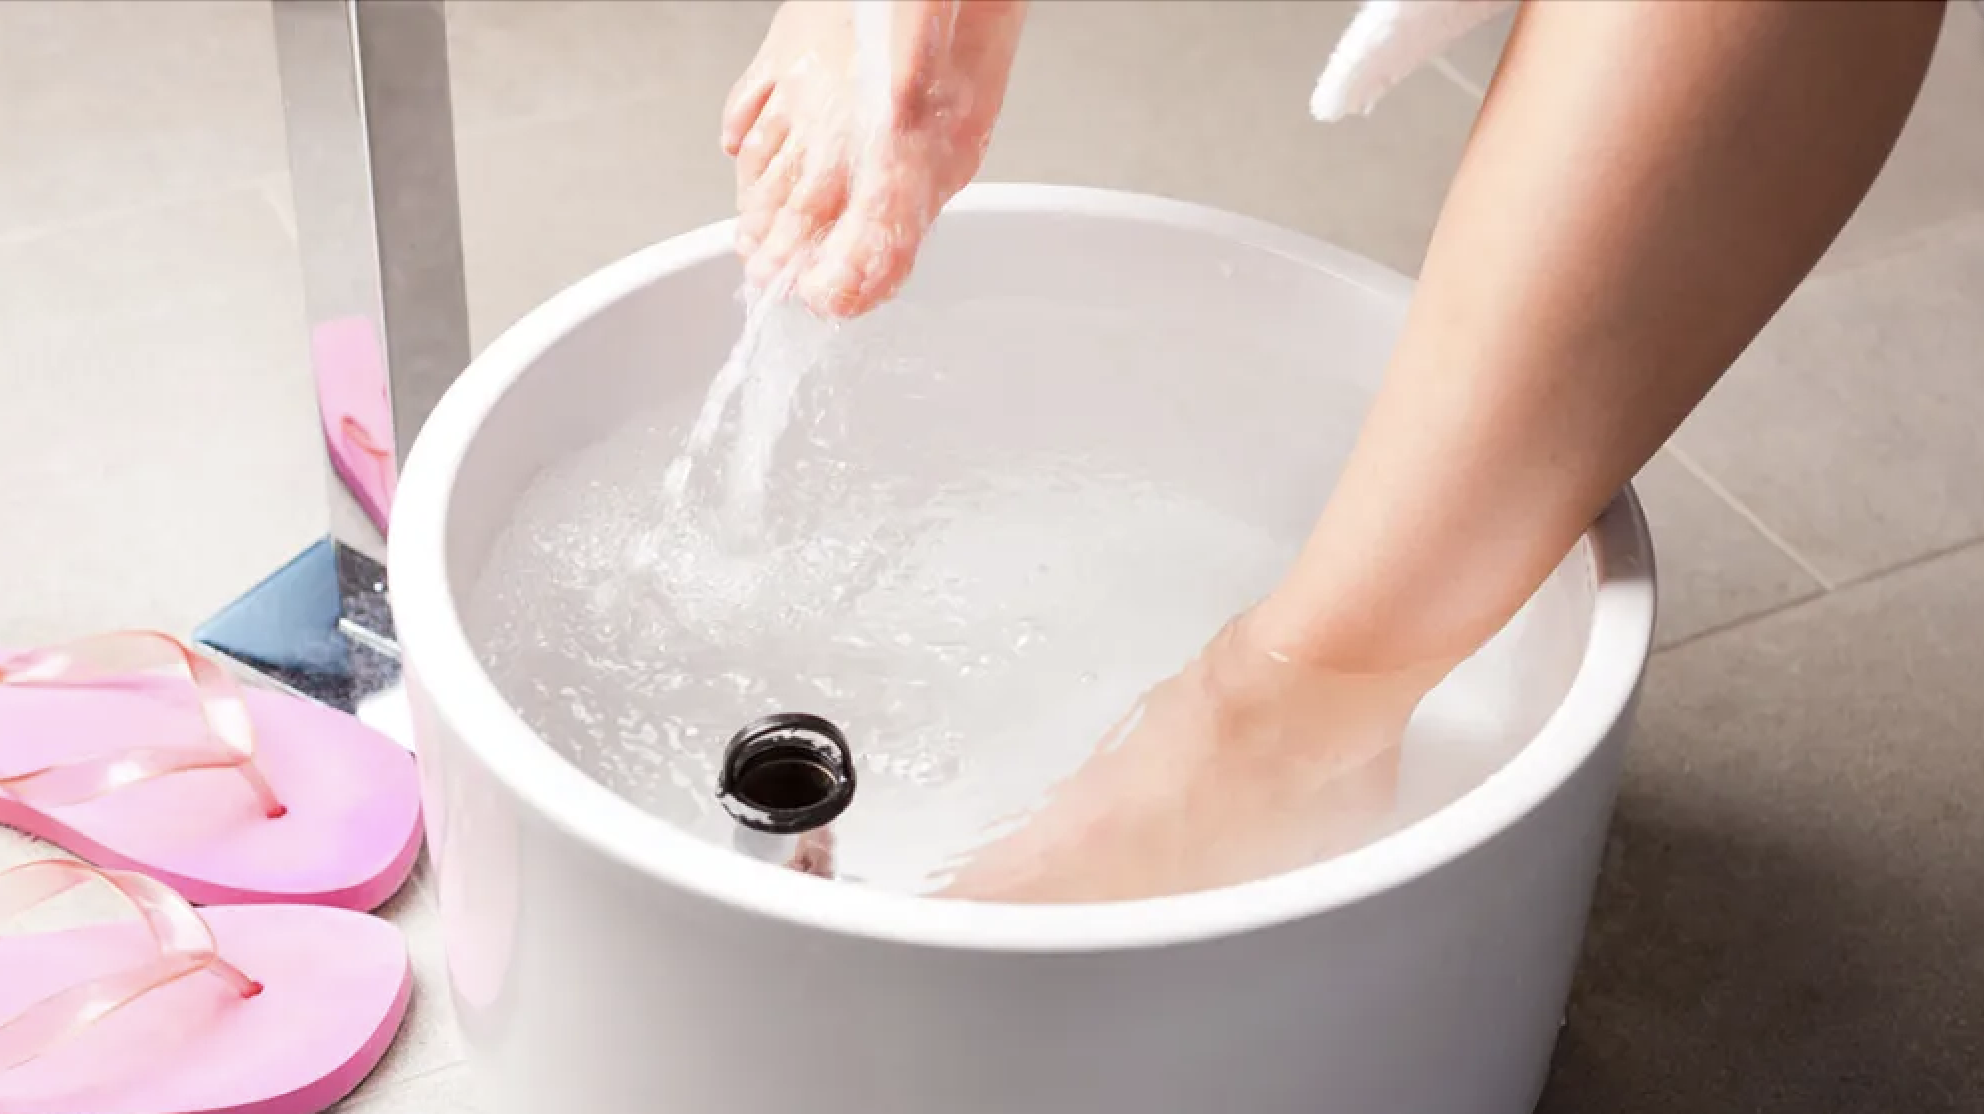 woman soaking feet to stop foot pain from standing all day